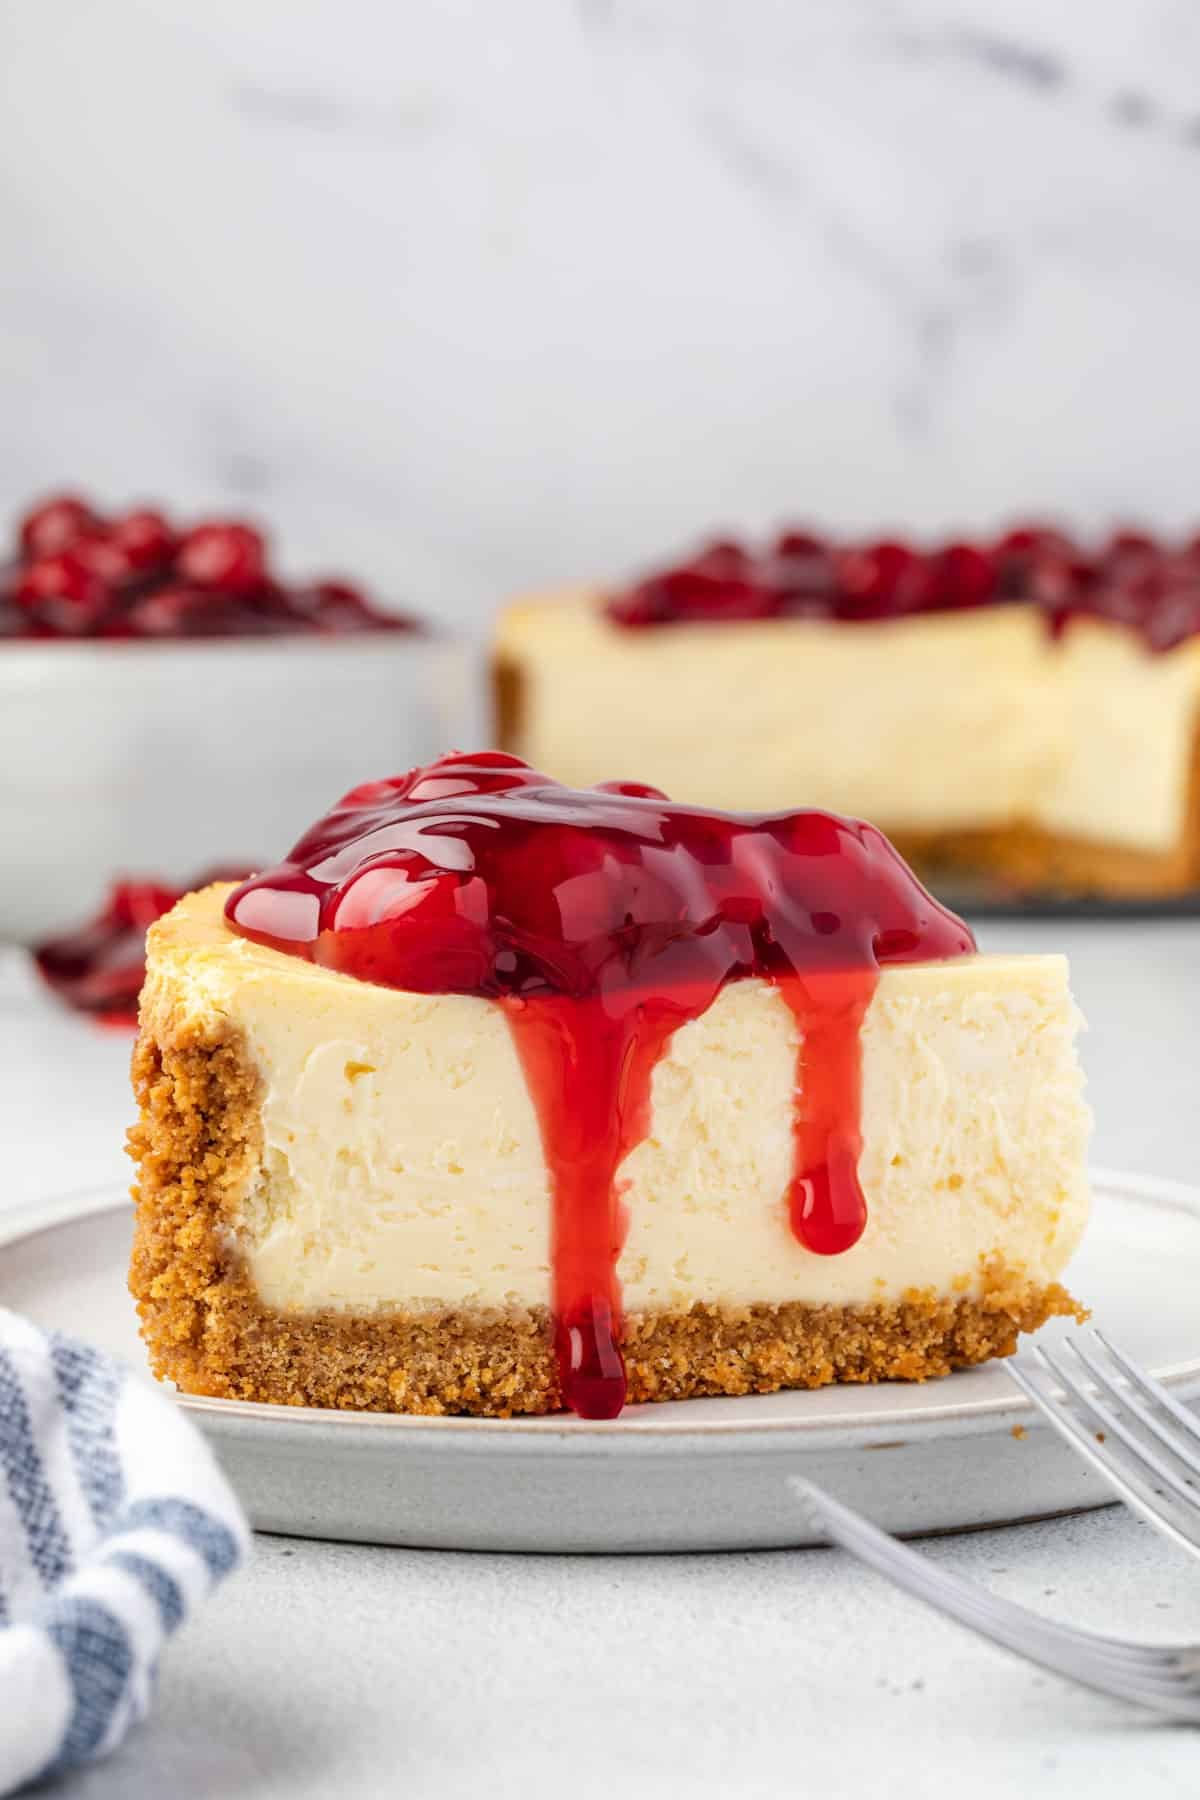 Slice of classic philadelphia cheesecake with graham cracker crust, topped with cherry pie filling that is dripping down side of cheesecake.